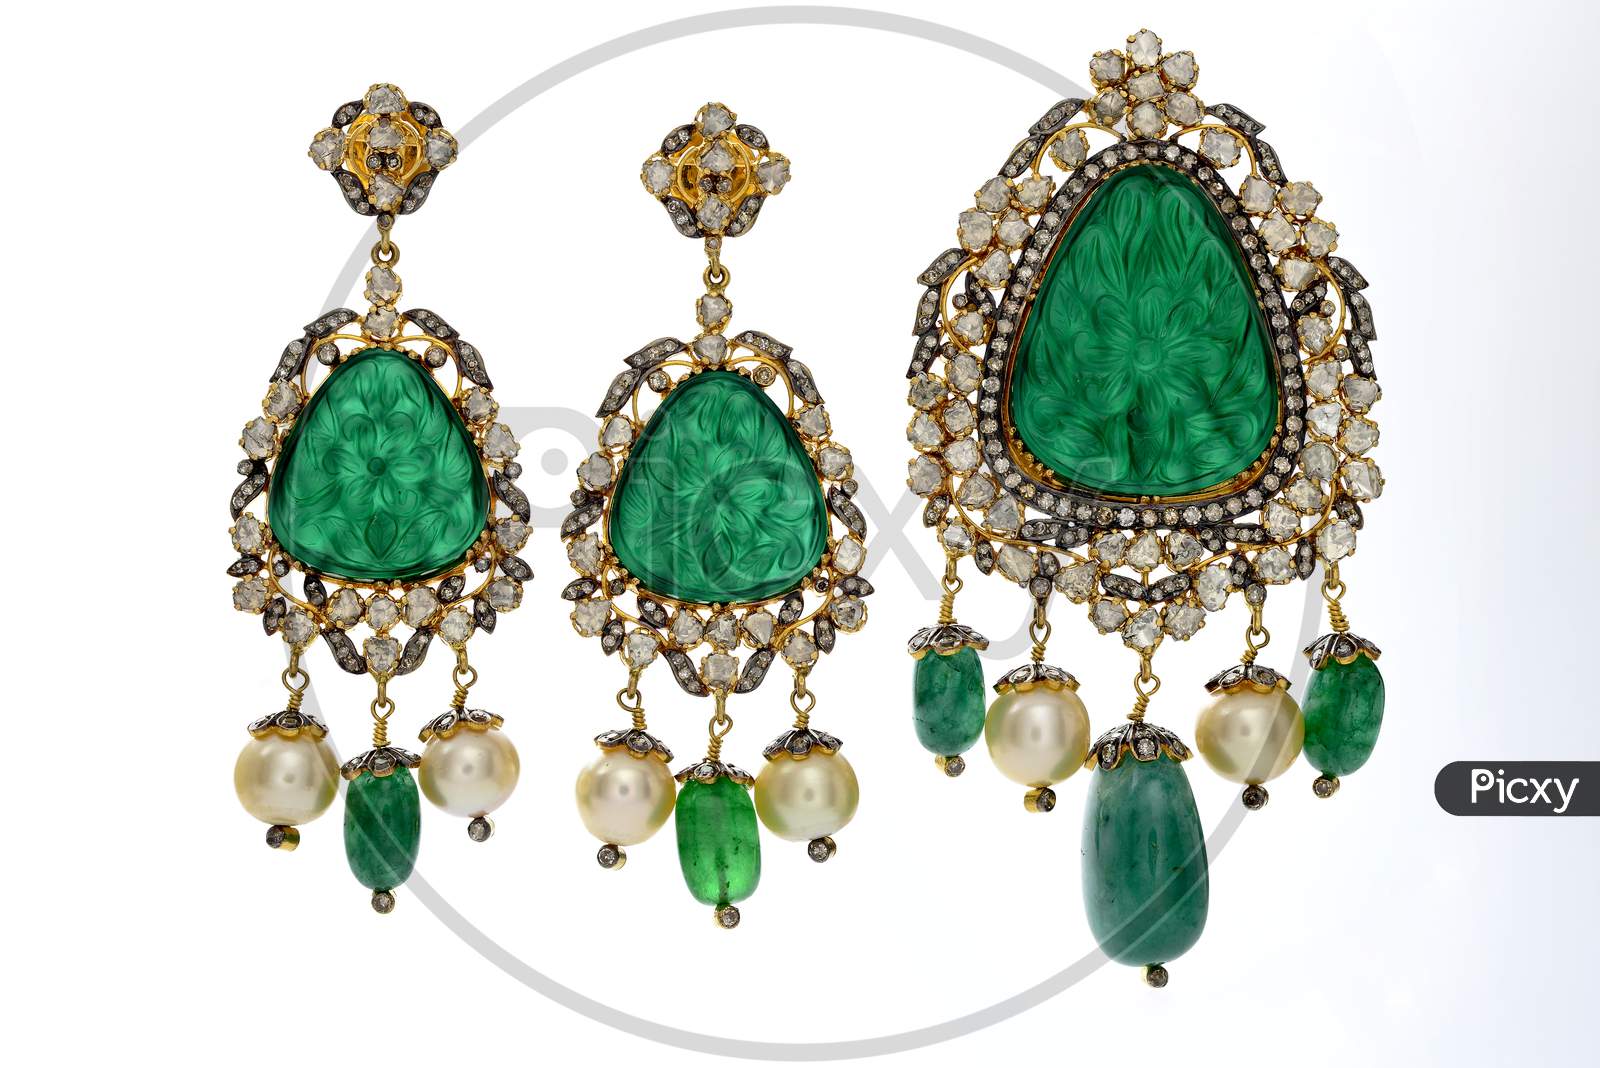 Indian Jewellery Ear Rings Designs Over Isolated Background